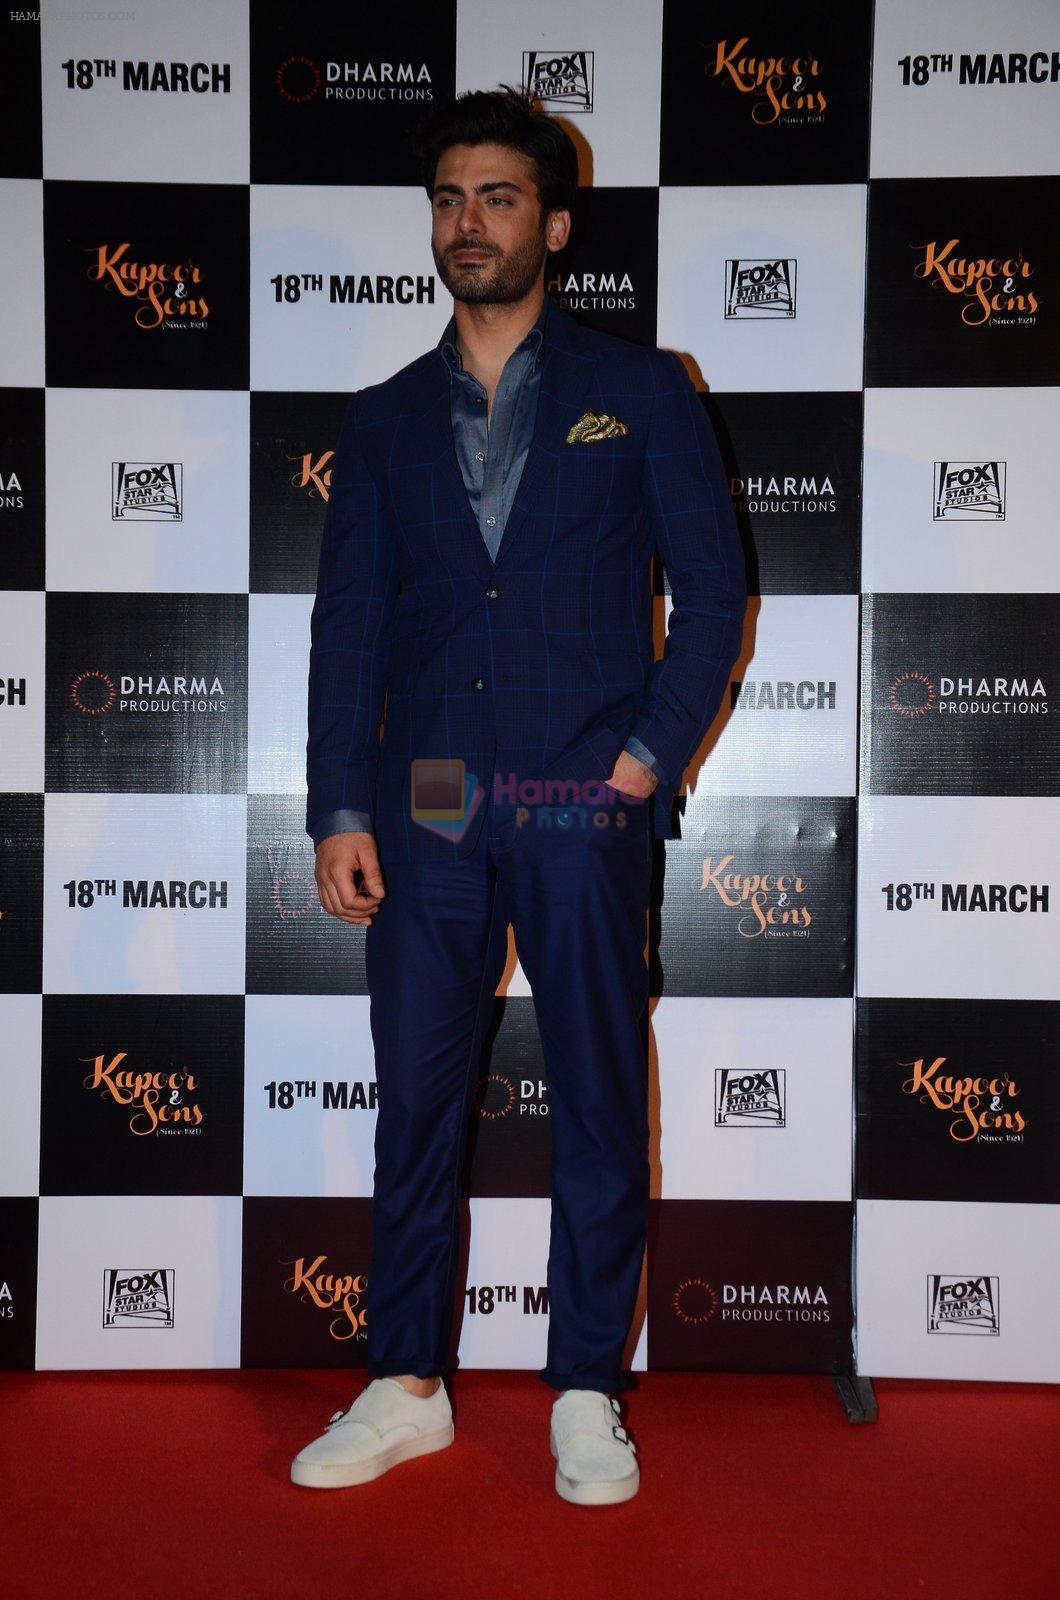 Fawad Khan at Kapoor n sons trailor launch on 10th Feb 2016